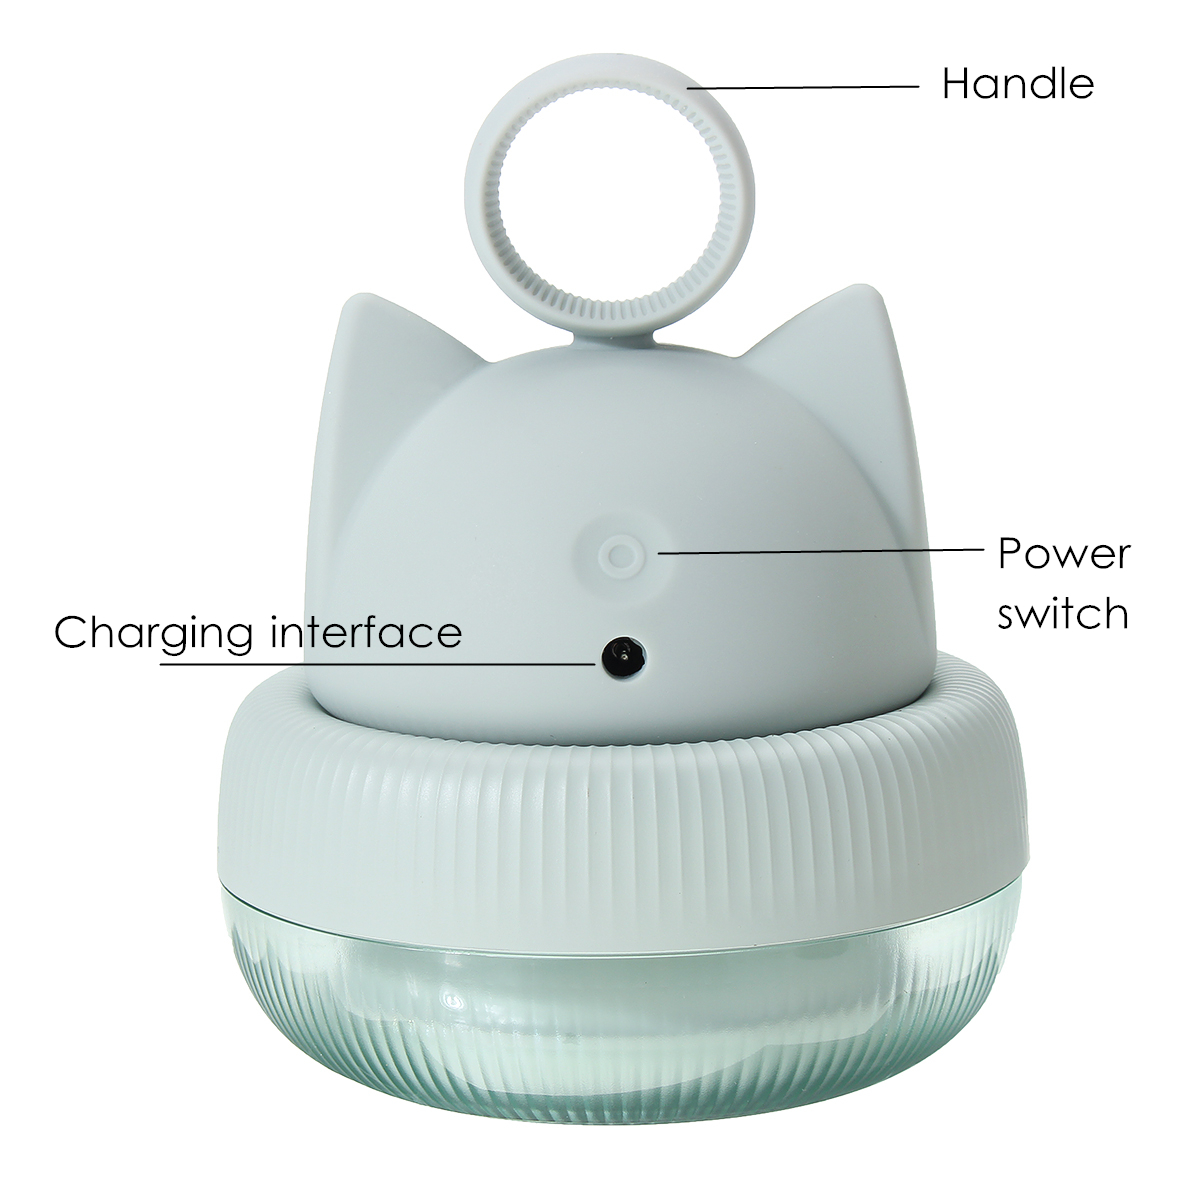 Poratble-Mini-Electric-Hair-Ball-Remover-USB-Rechargeable-Clothes-Fluff-Remover-Sweater-Fuzz-Shaver-1595886-3